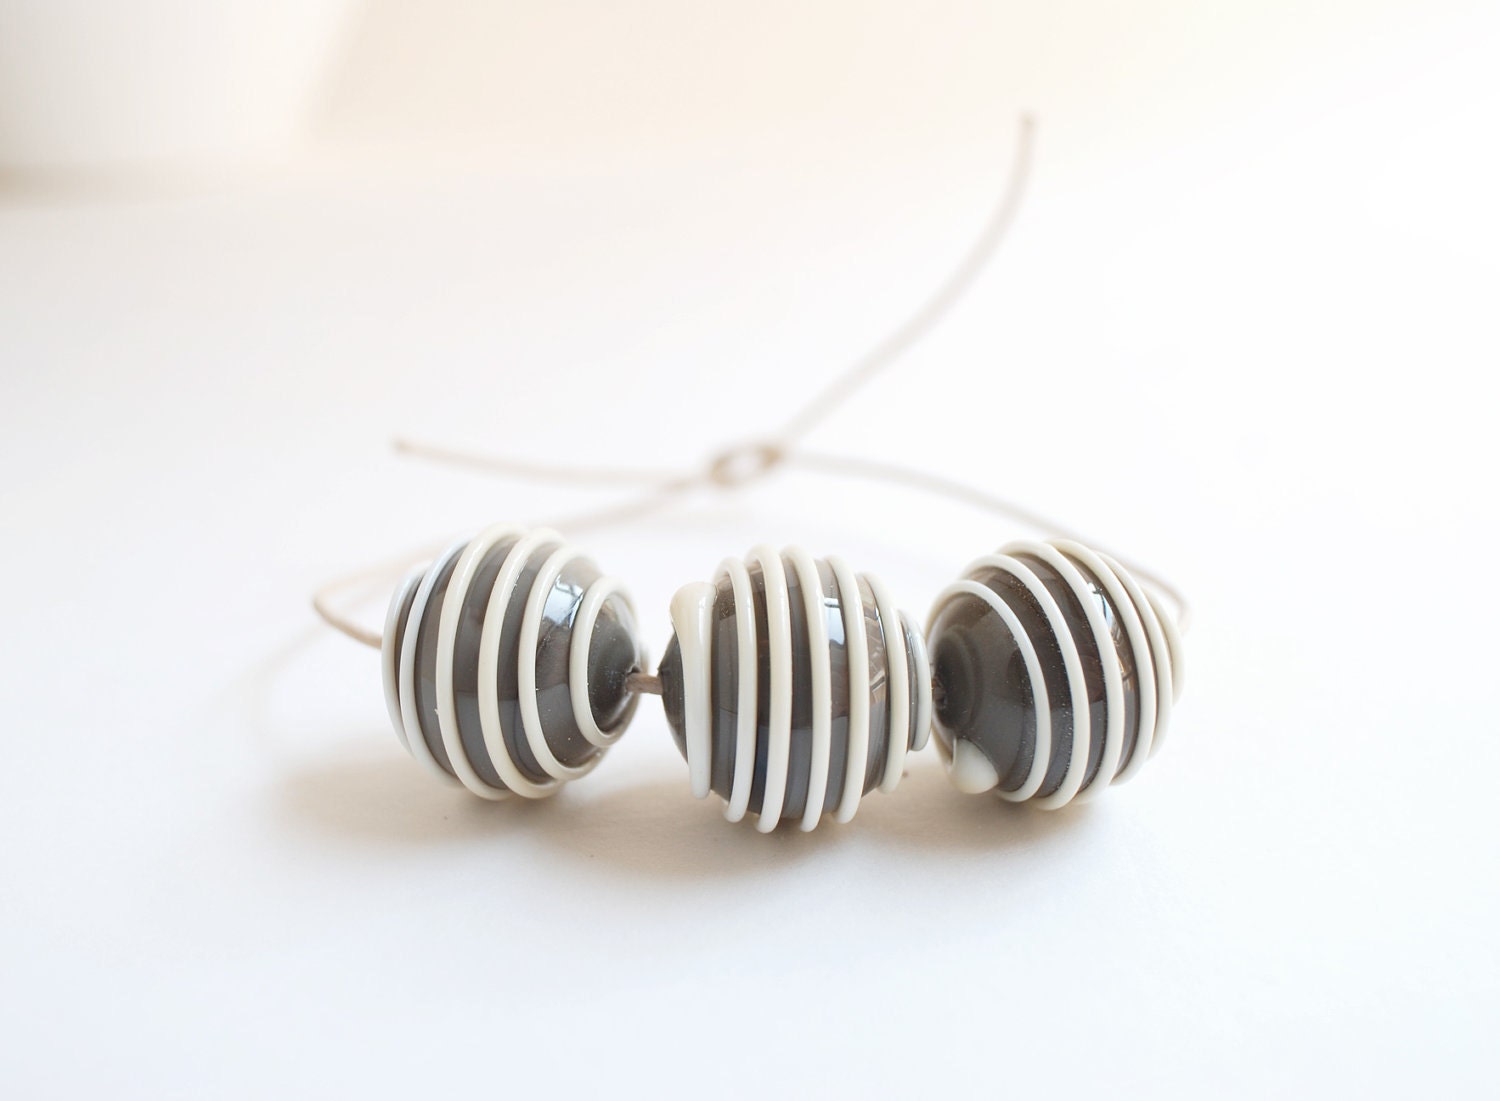 Lampwork Glass Beads - Set of (3) Gray with Ivory embossed stripes